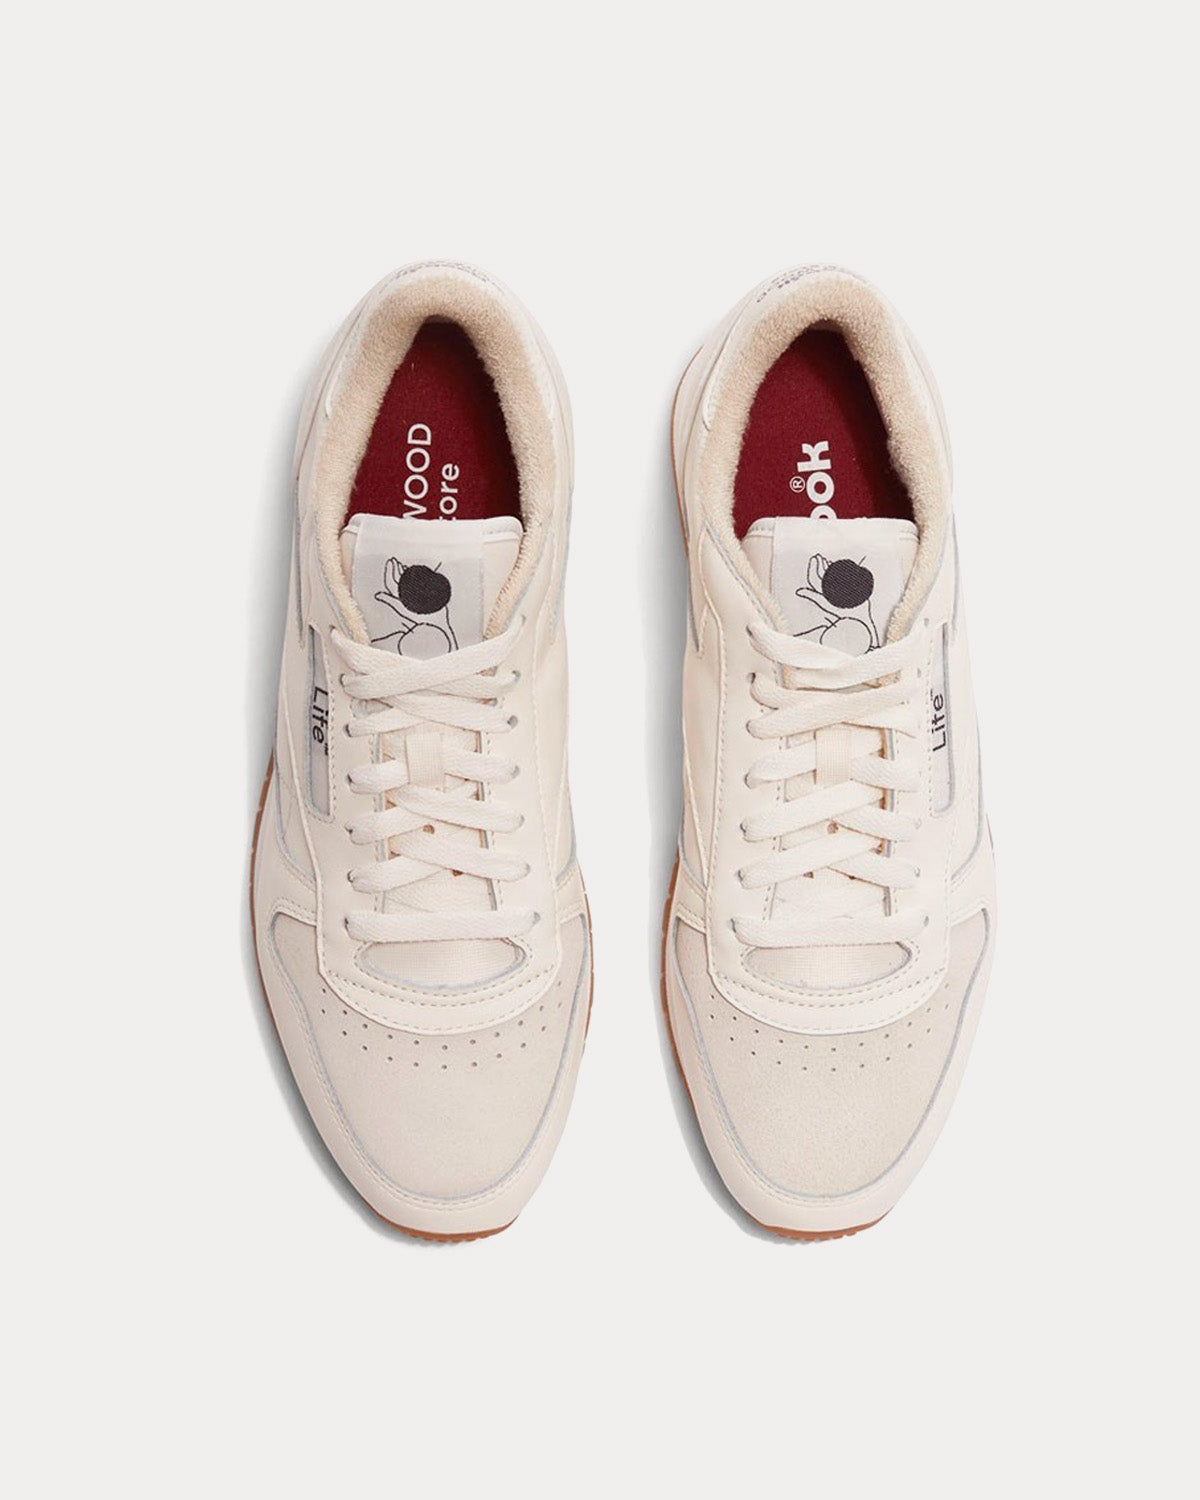 Reebok x Wood Wood - Classic Leather Chalk / Pure Grey 1 / Stucco Low Top Sneakers